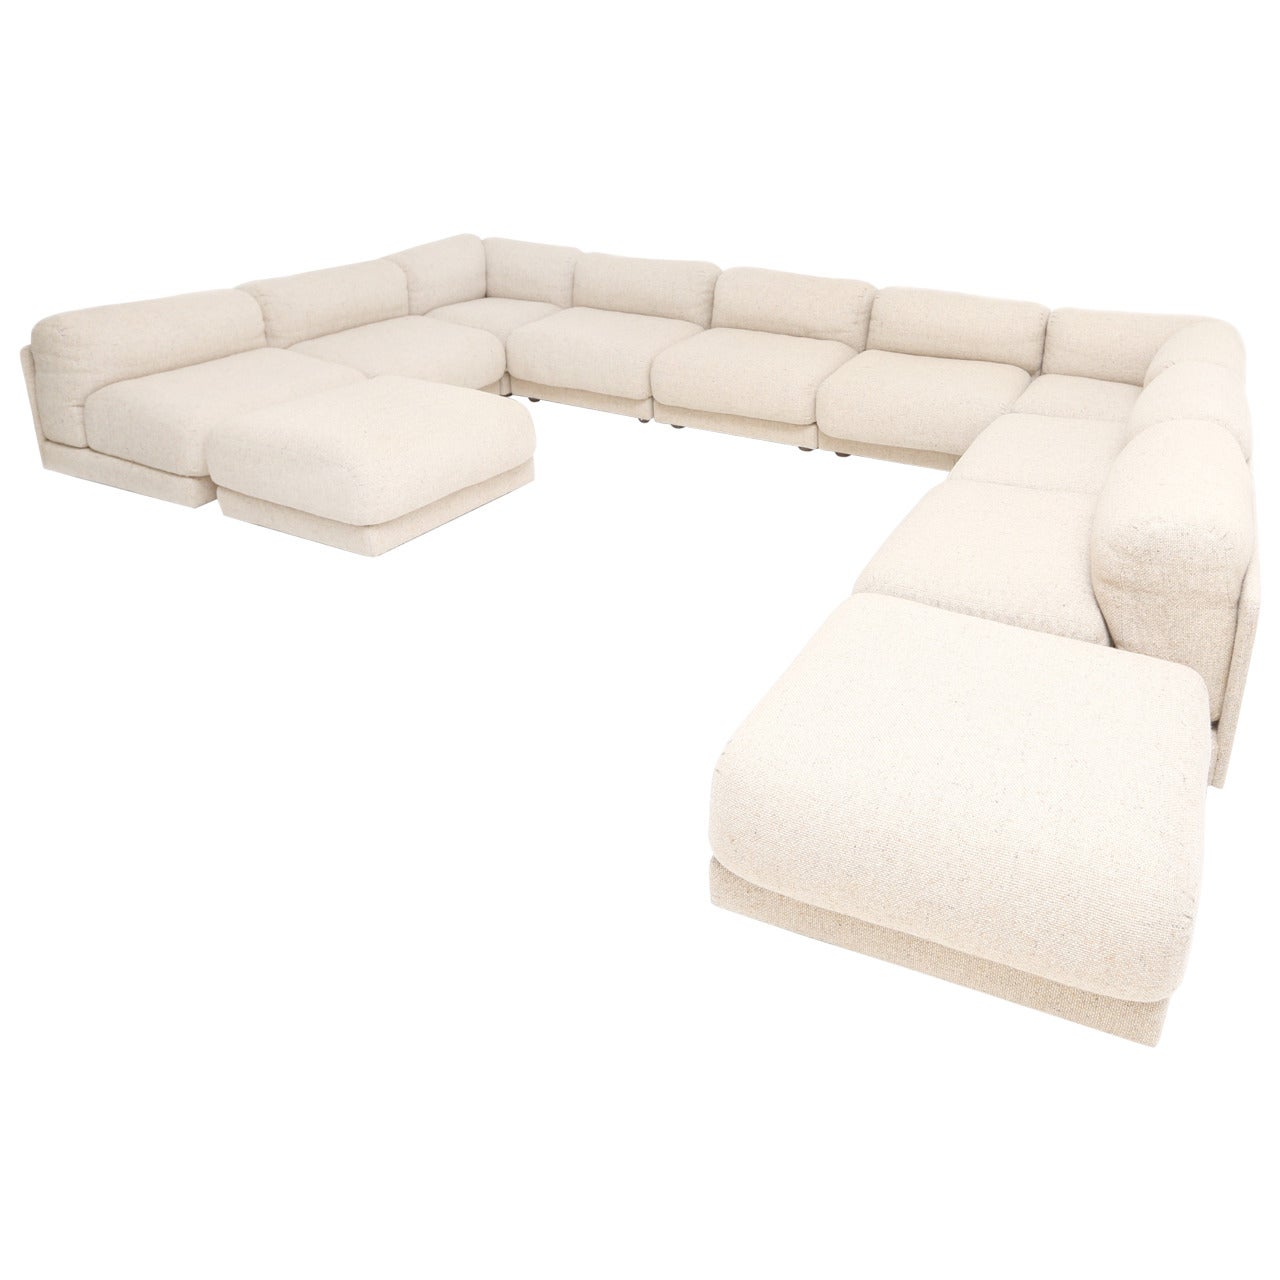 Durlet 1970s Sectional Sofa